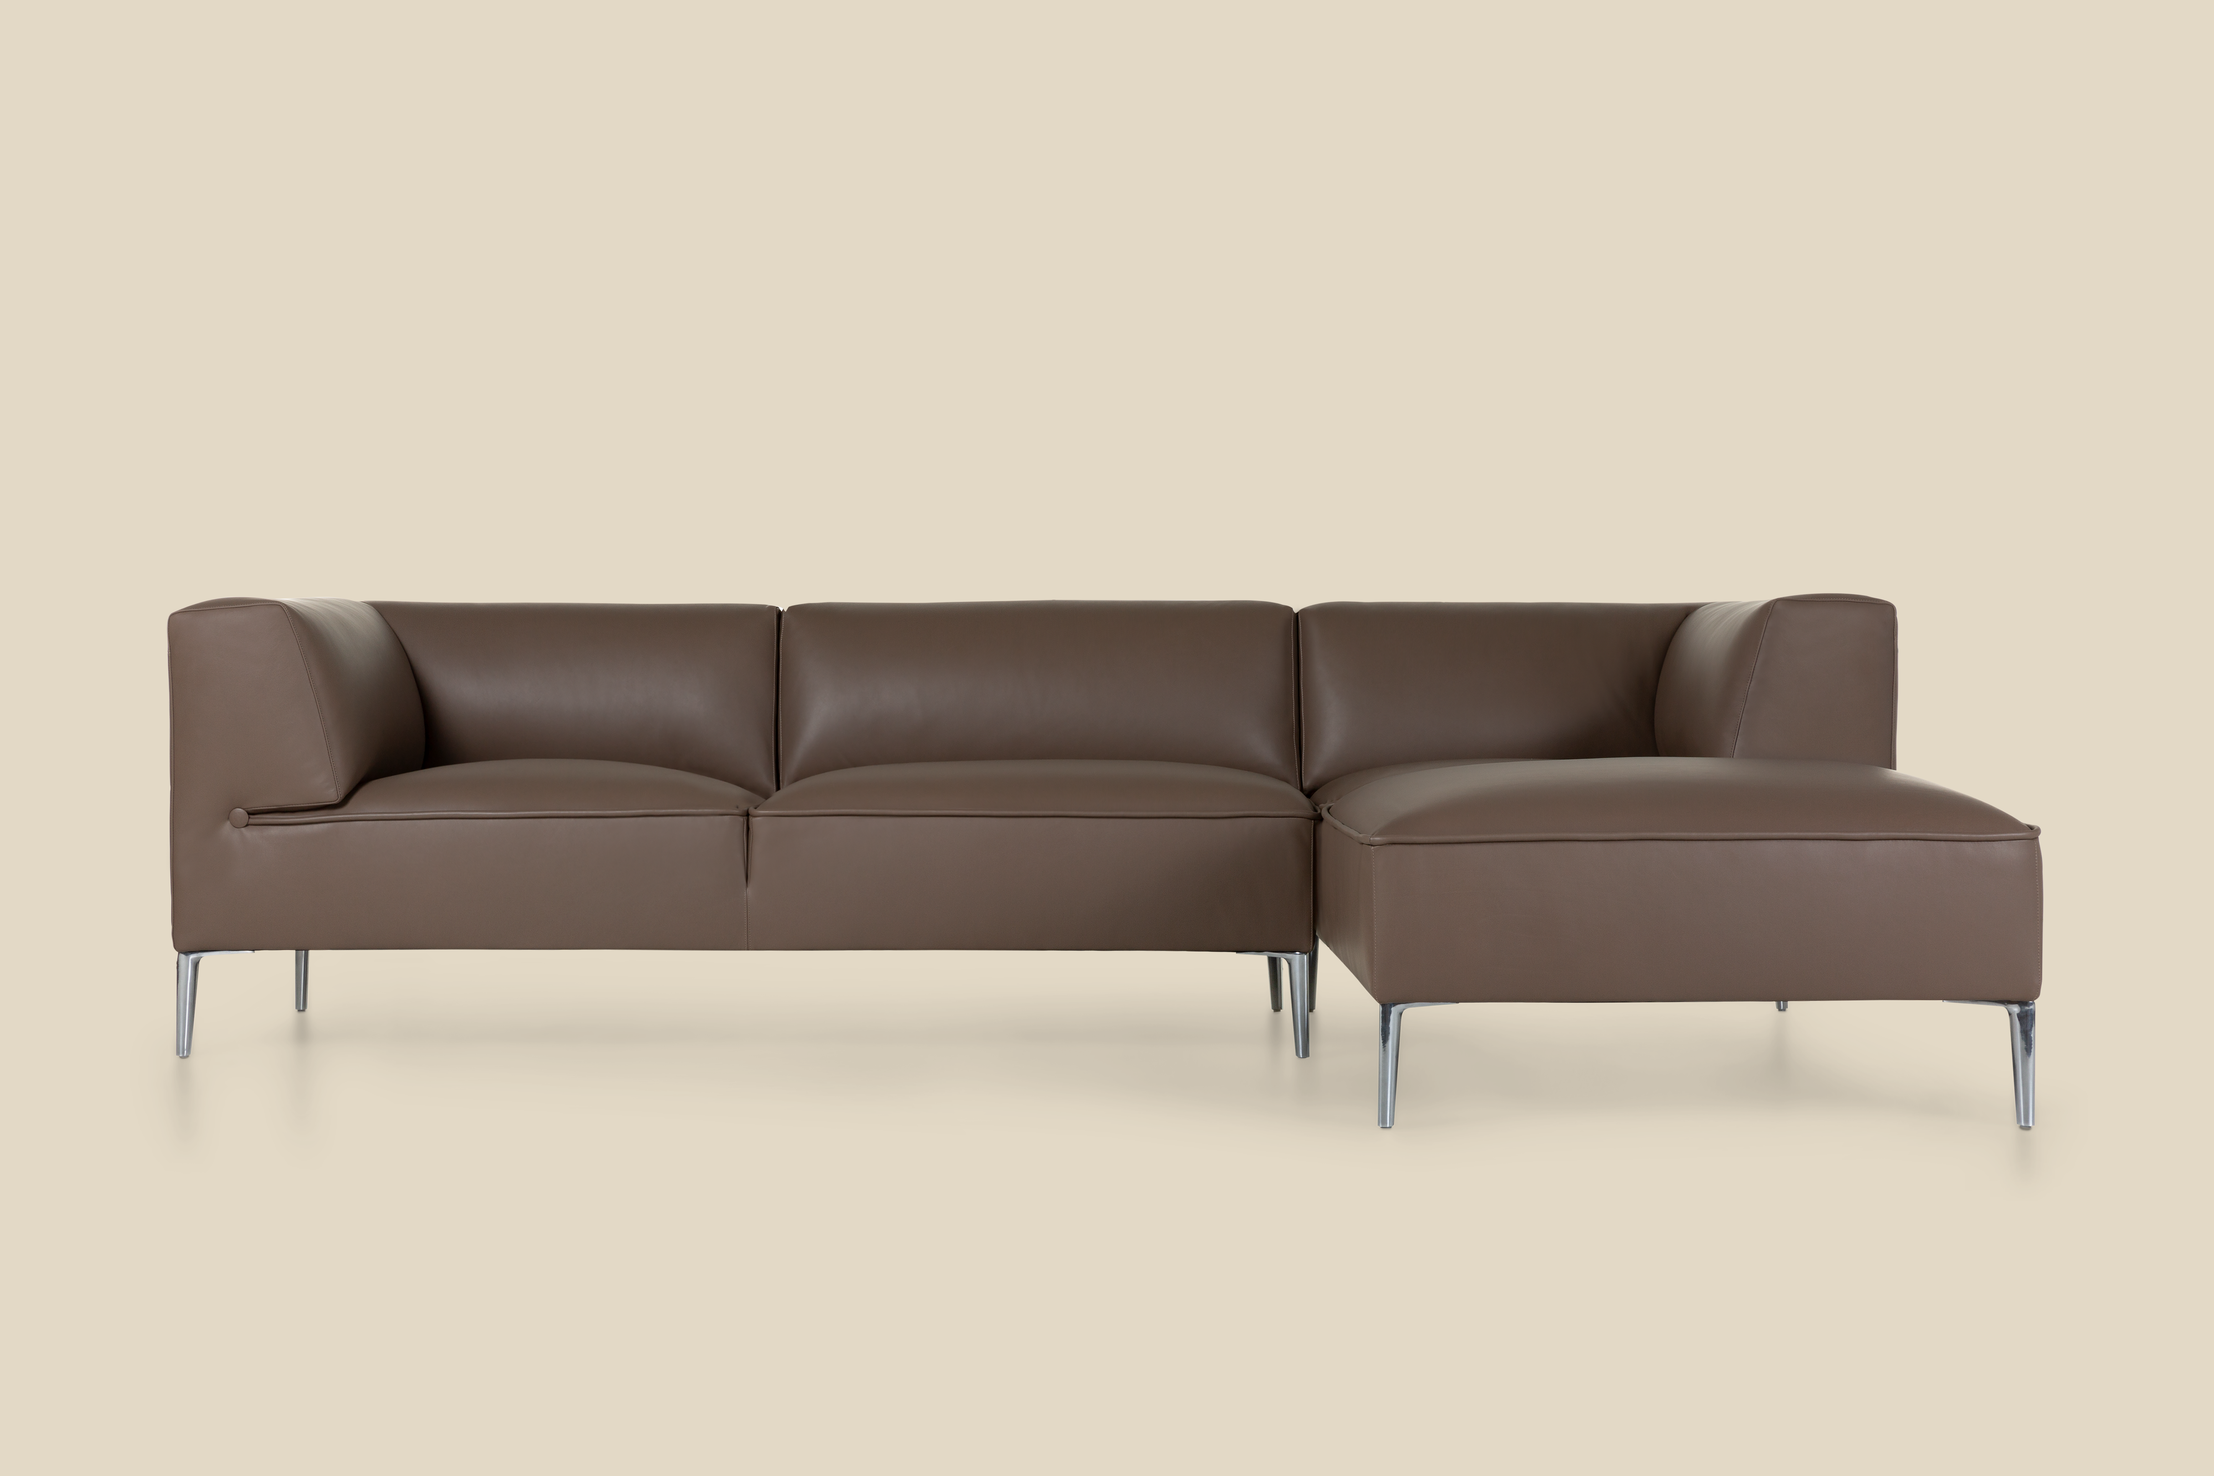 Sofa So Good Raw umber double front view